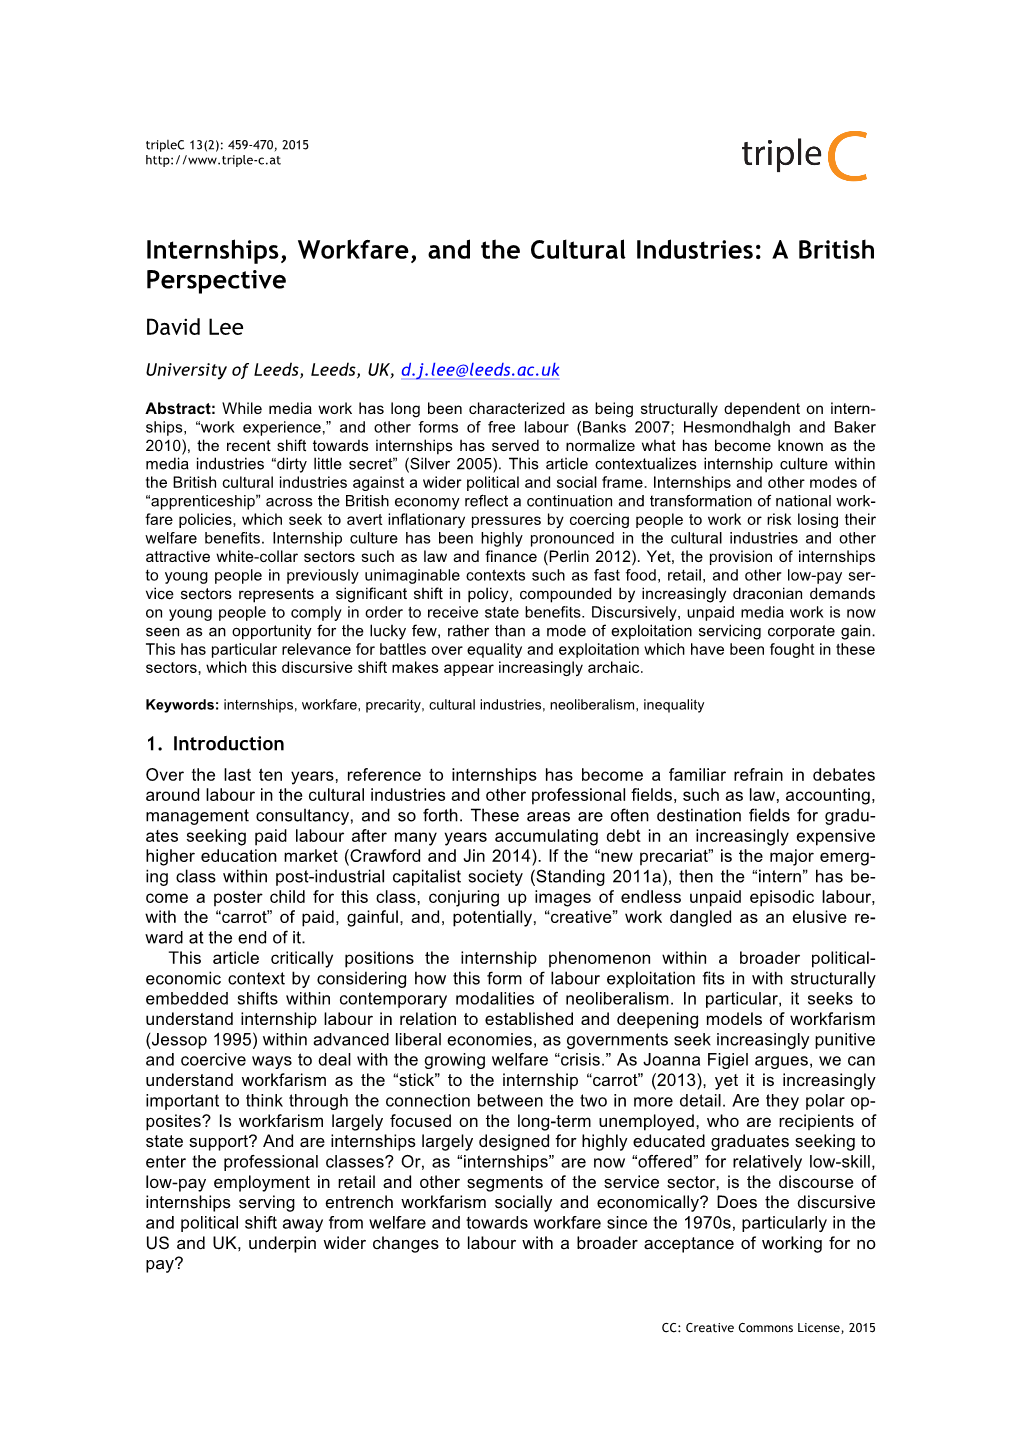 Internships, Workfare, and the Cultural Industries: a British Perspective